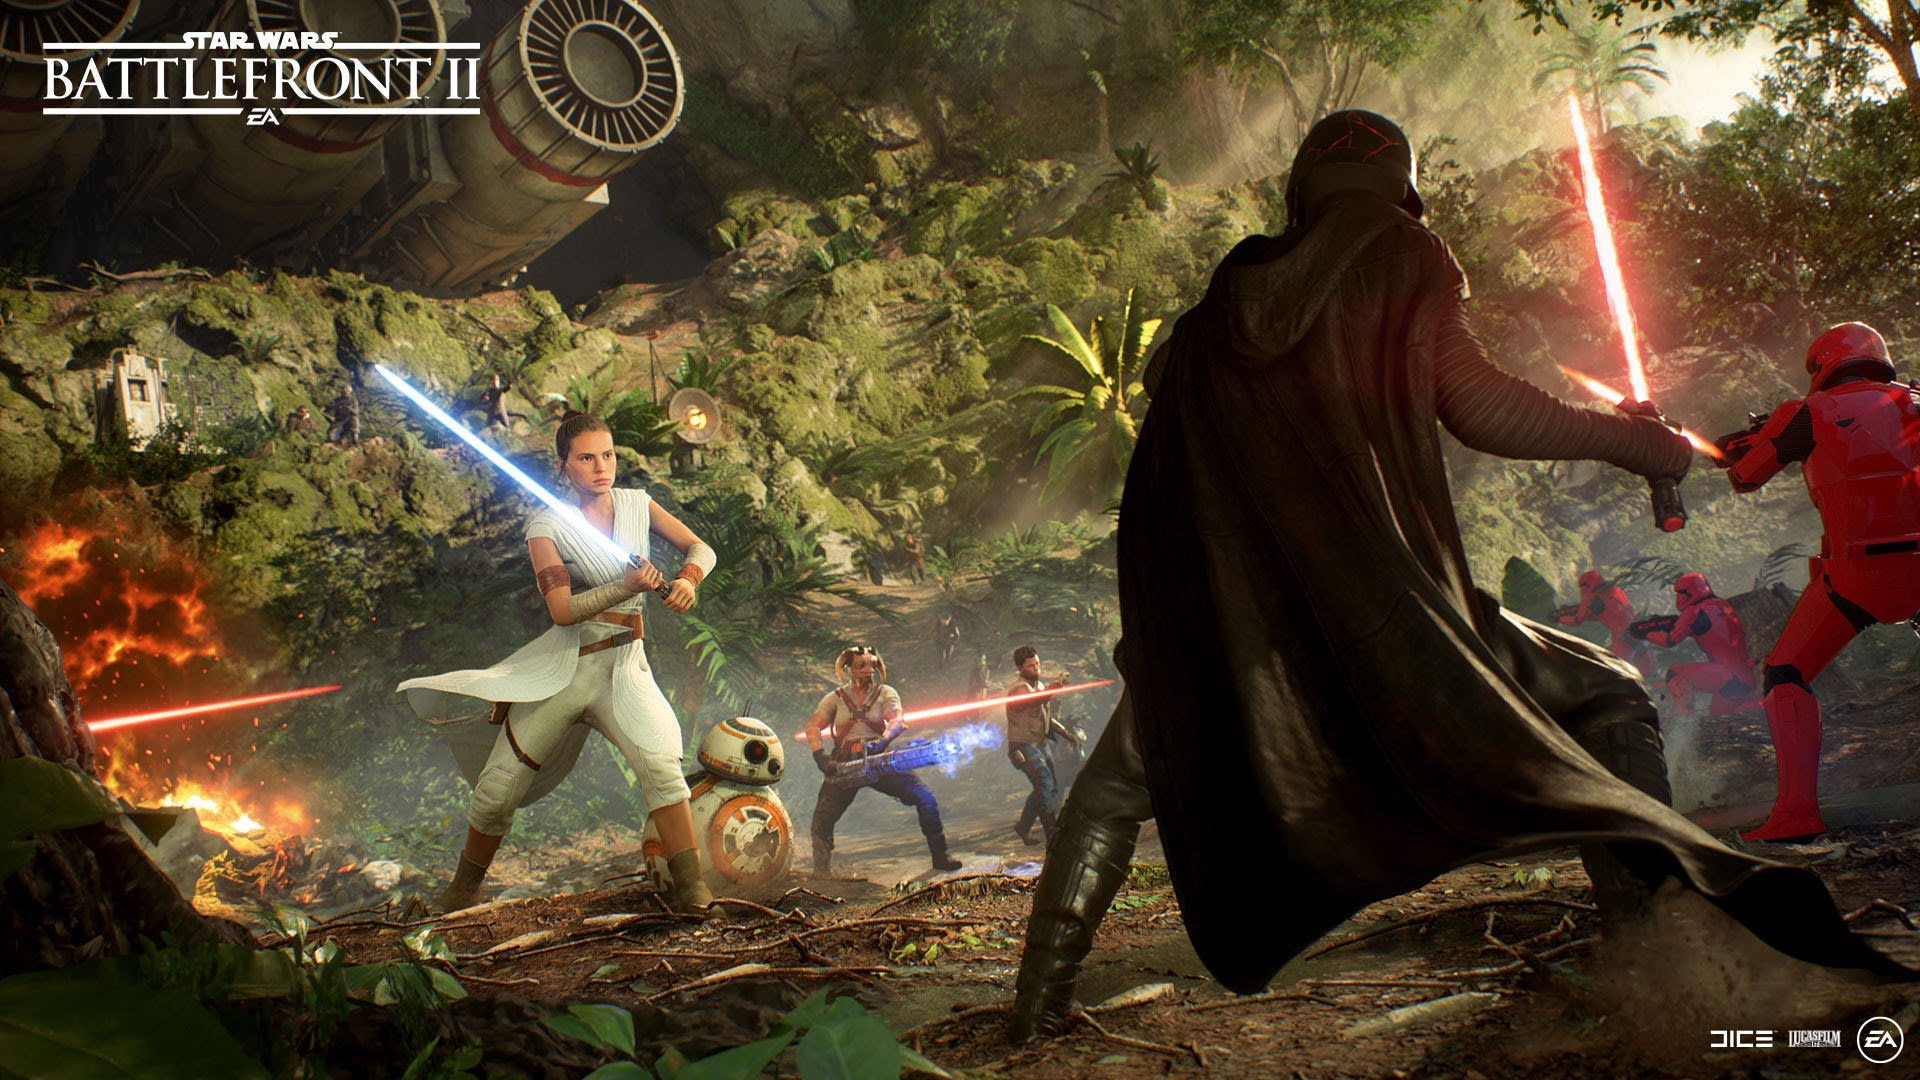 1920x1080 Star Wars: Battlefront II HD Wallpapers and Backgrounds